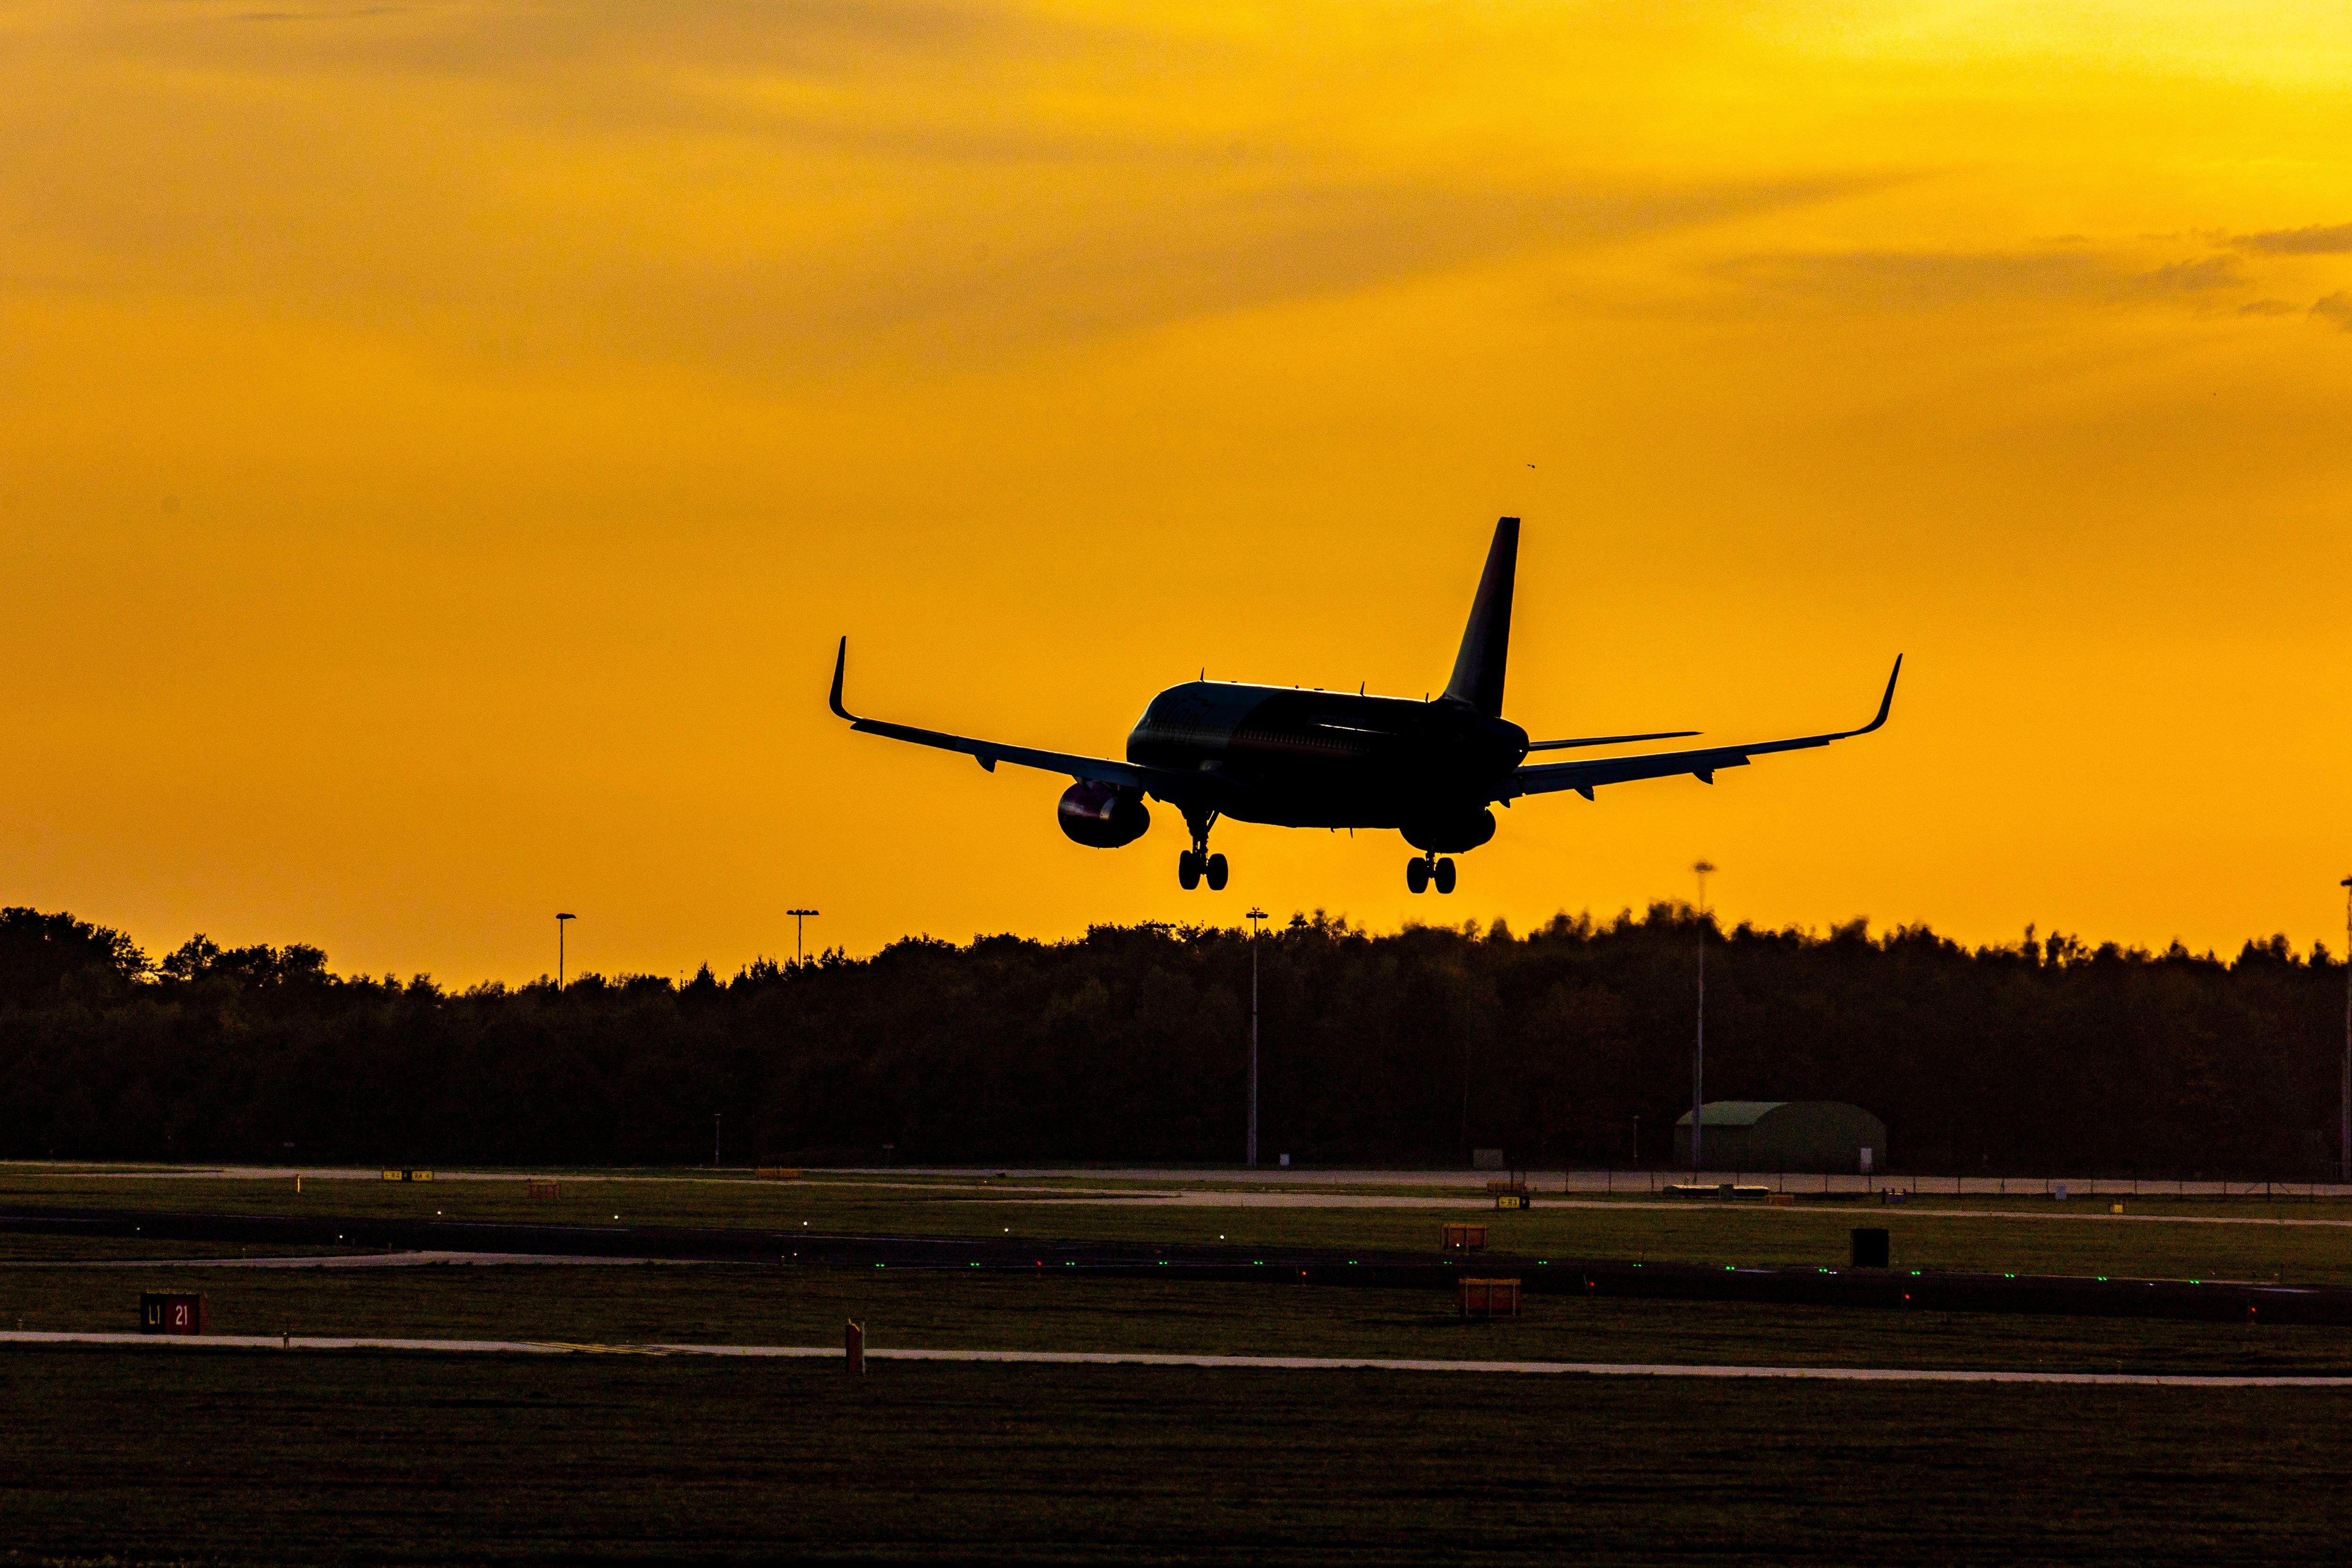 Airbus A320 Airplane Silhouette landing at airport